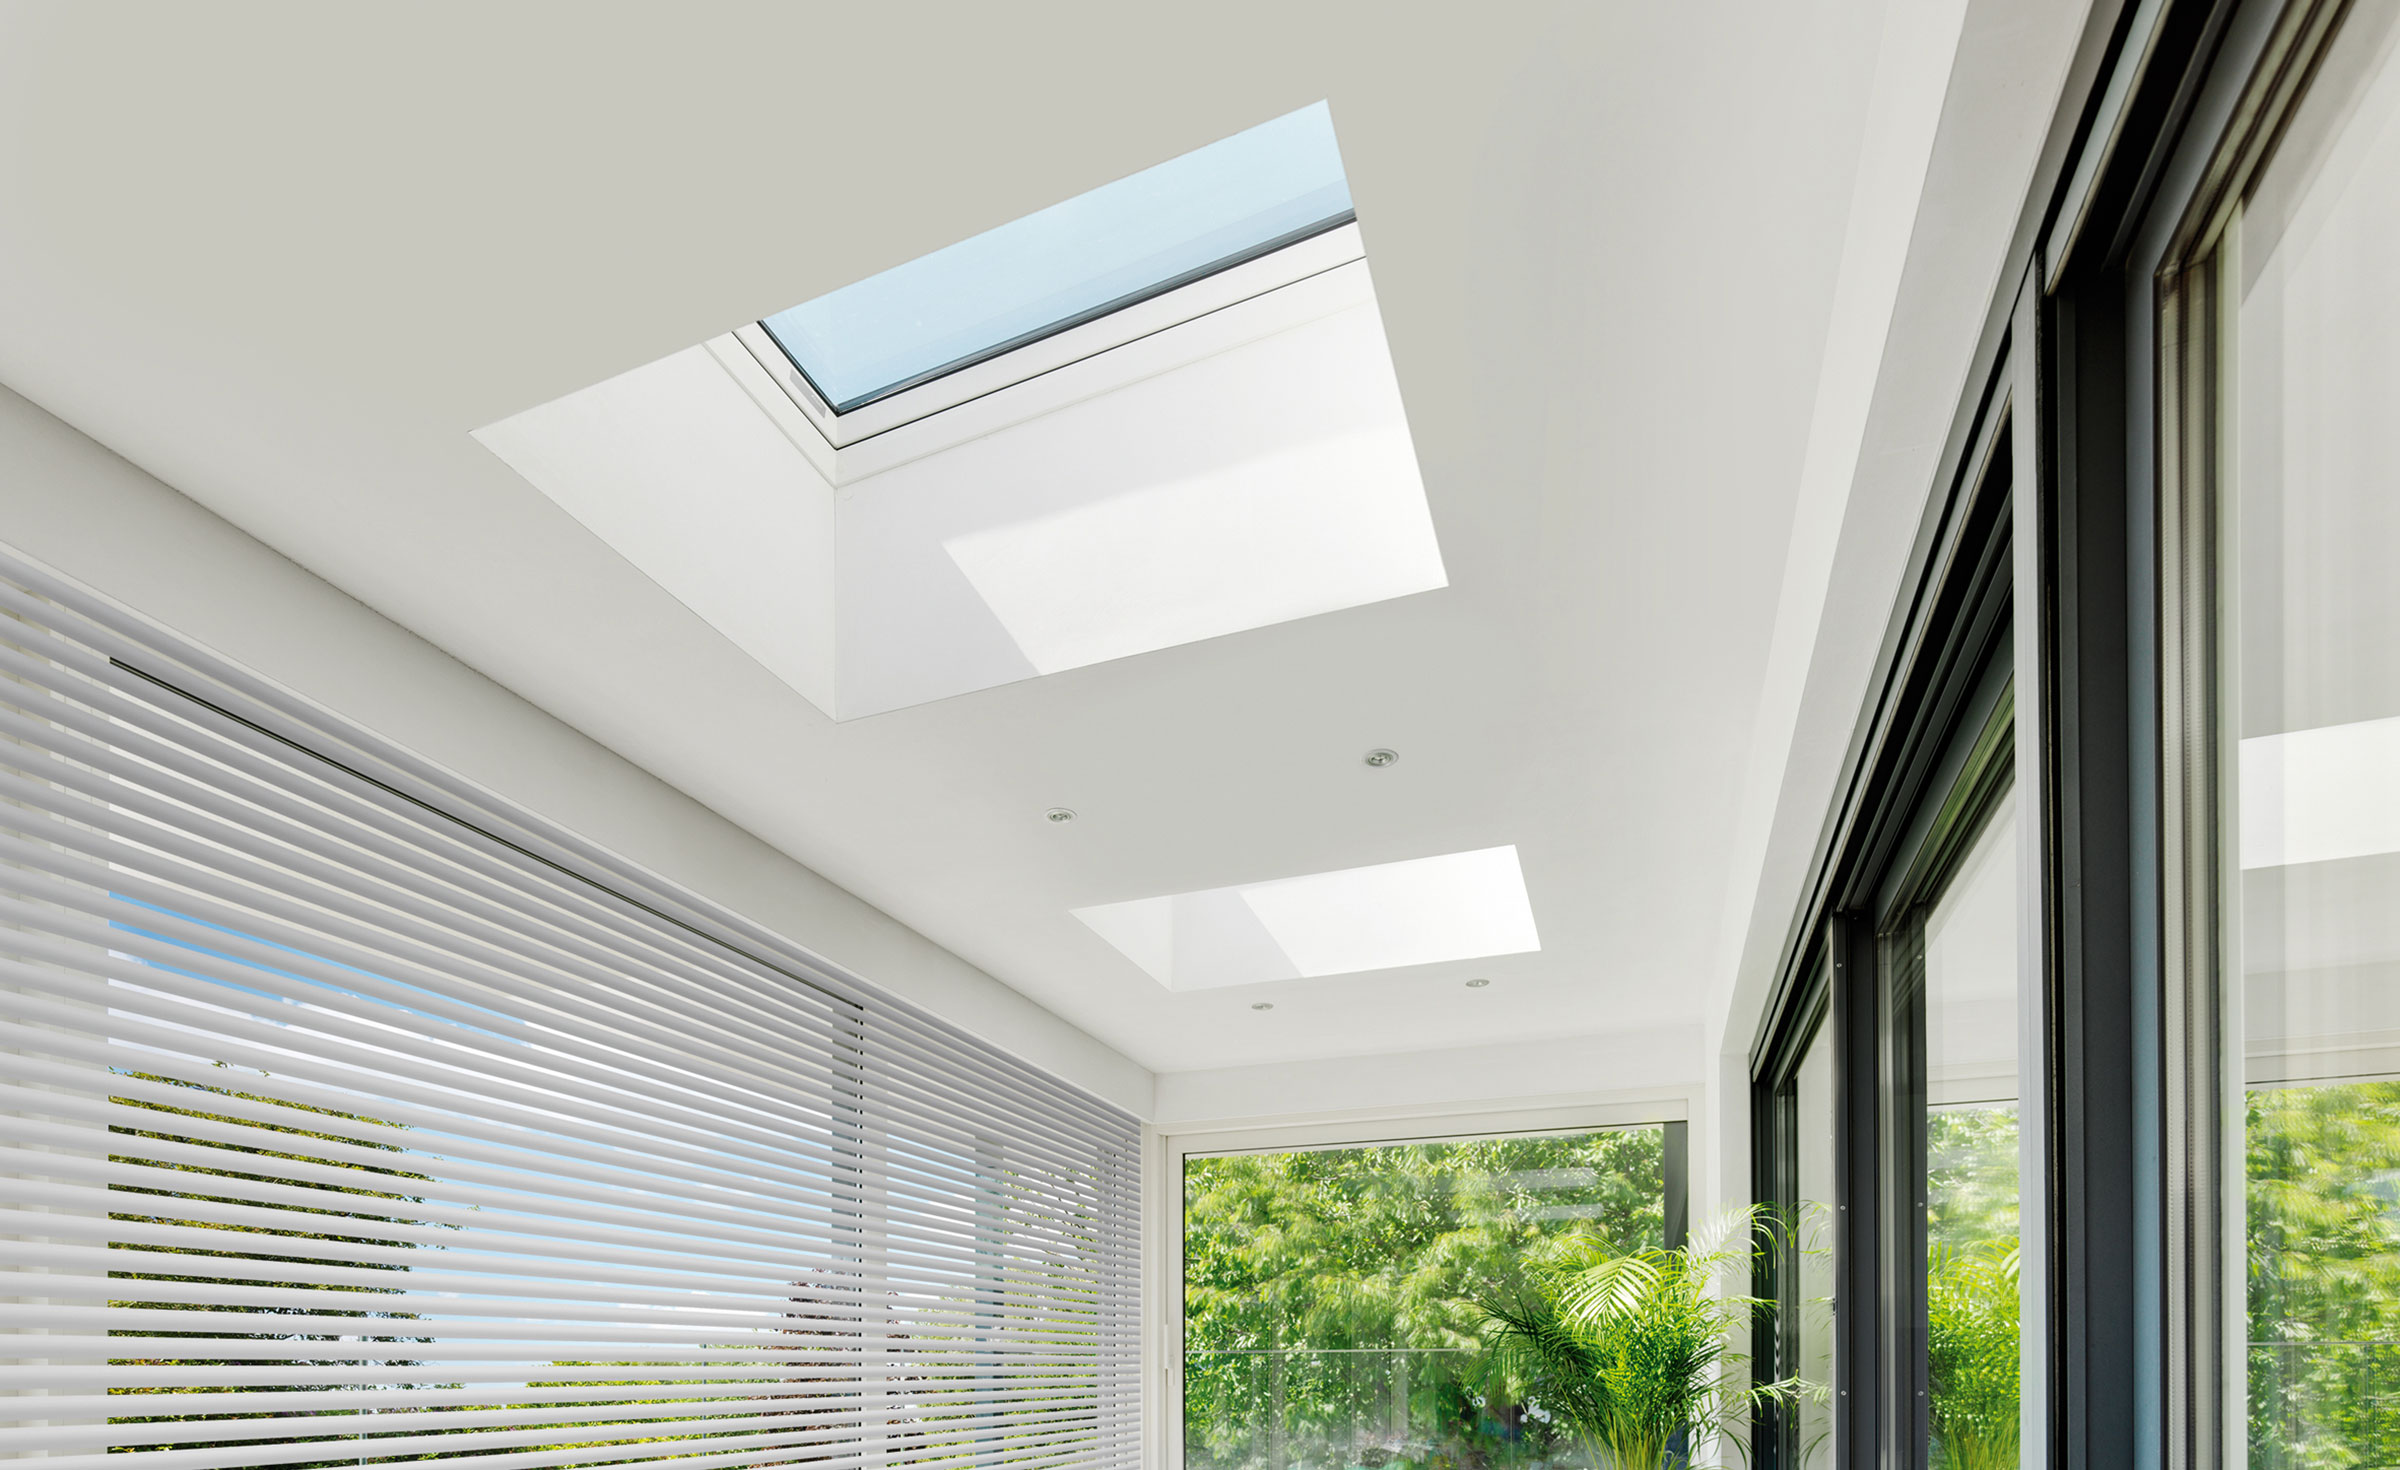 Mardome Roof Lights Could Be A Great Addition To Your Home